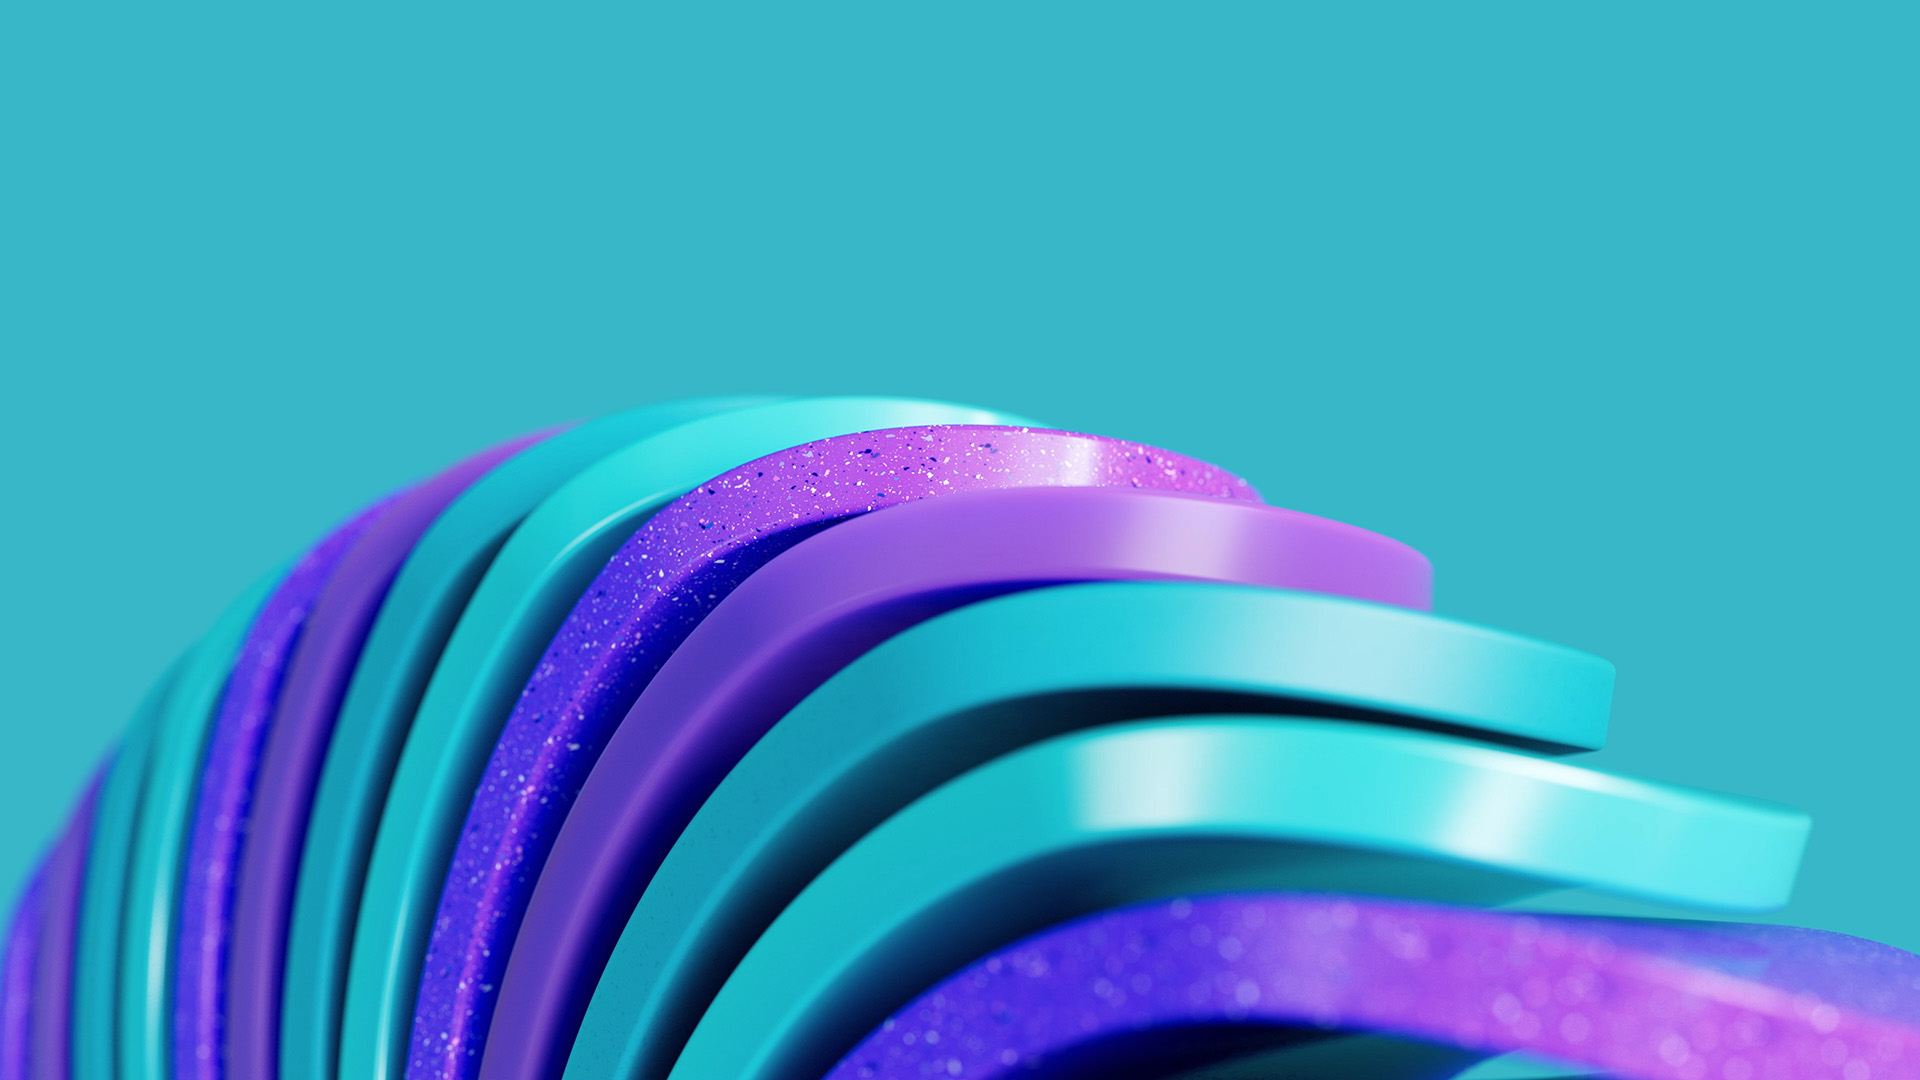 Vibrant shapes and colors for dynamic brand launch animated video